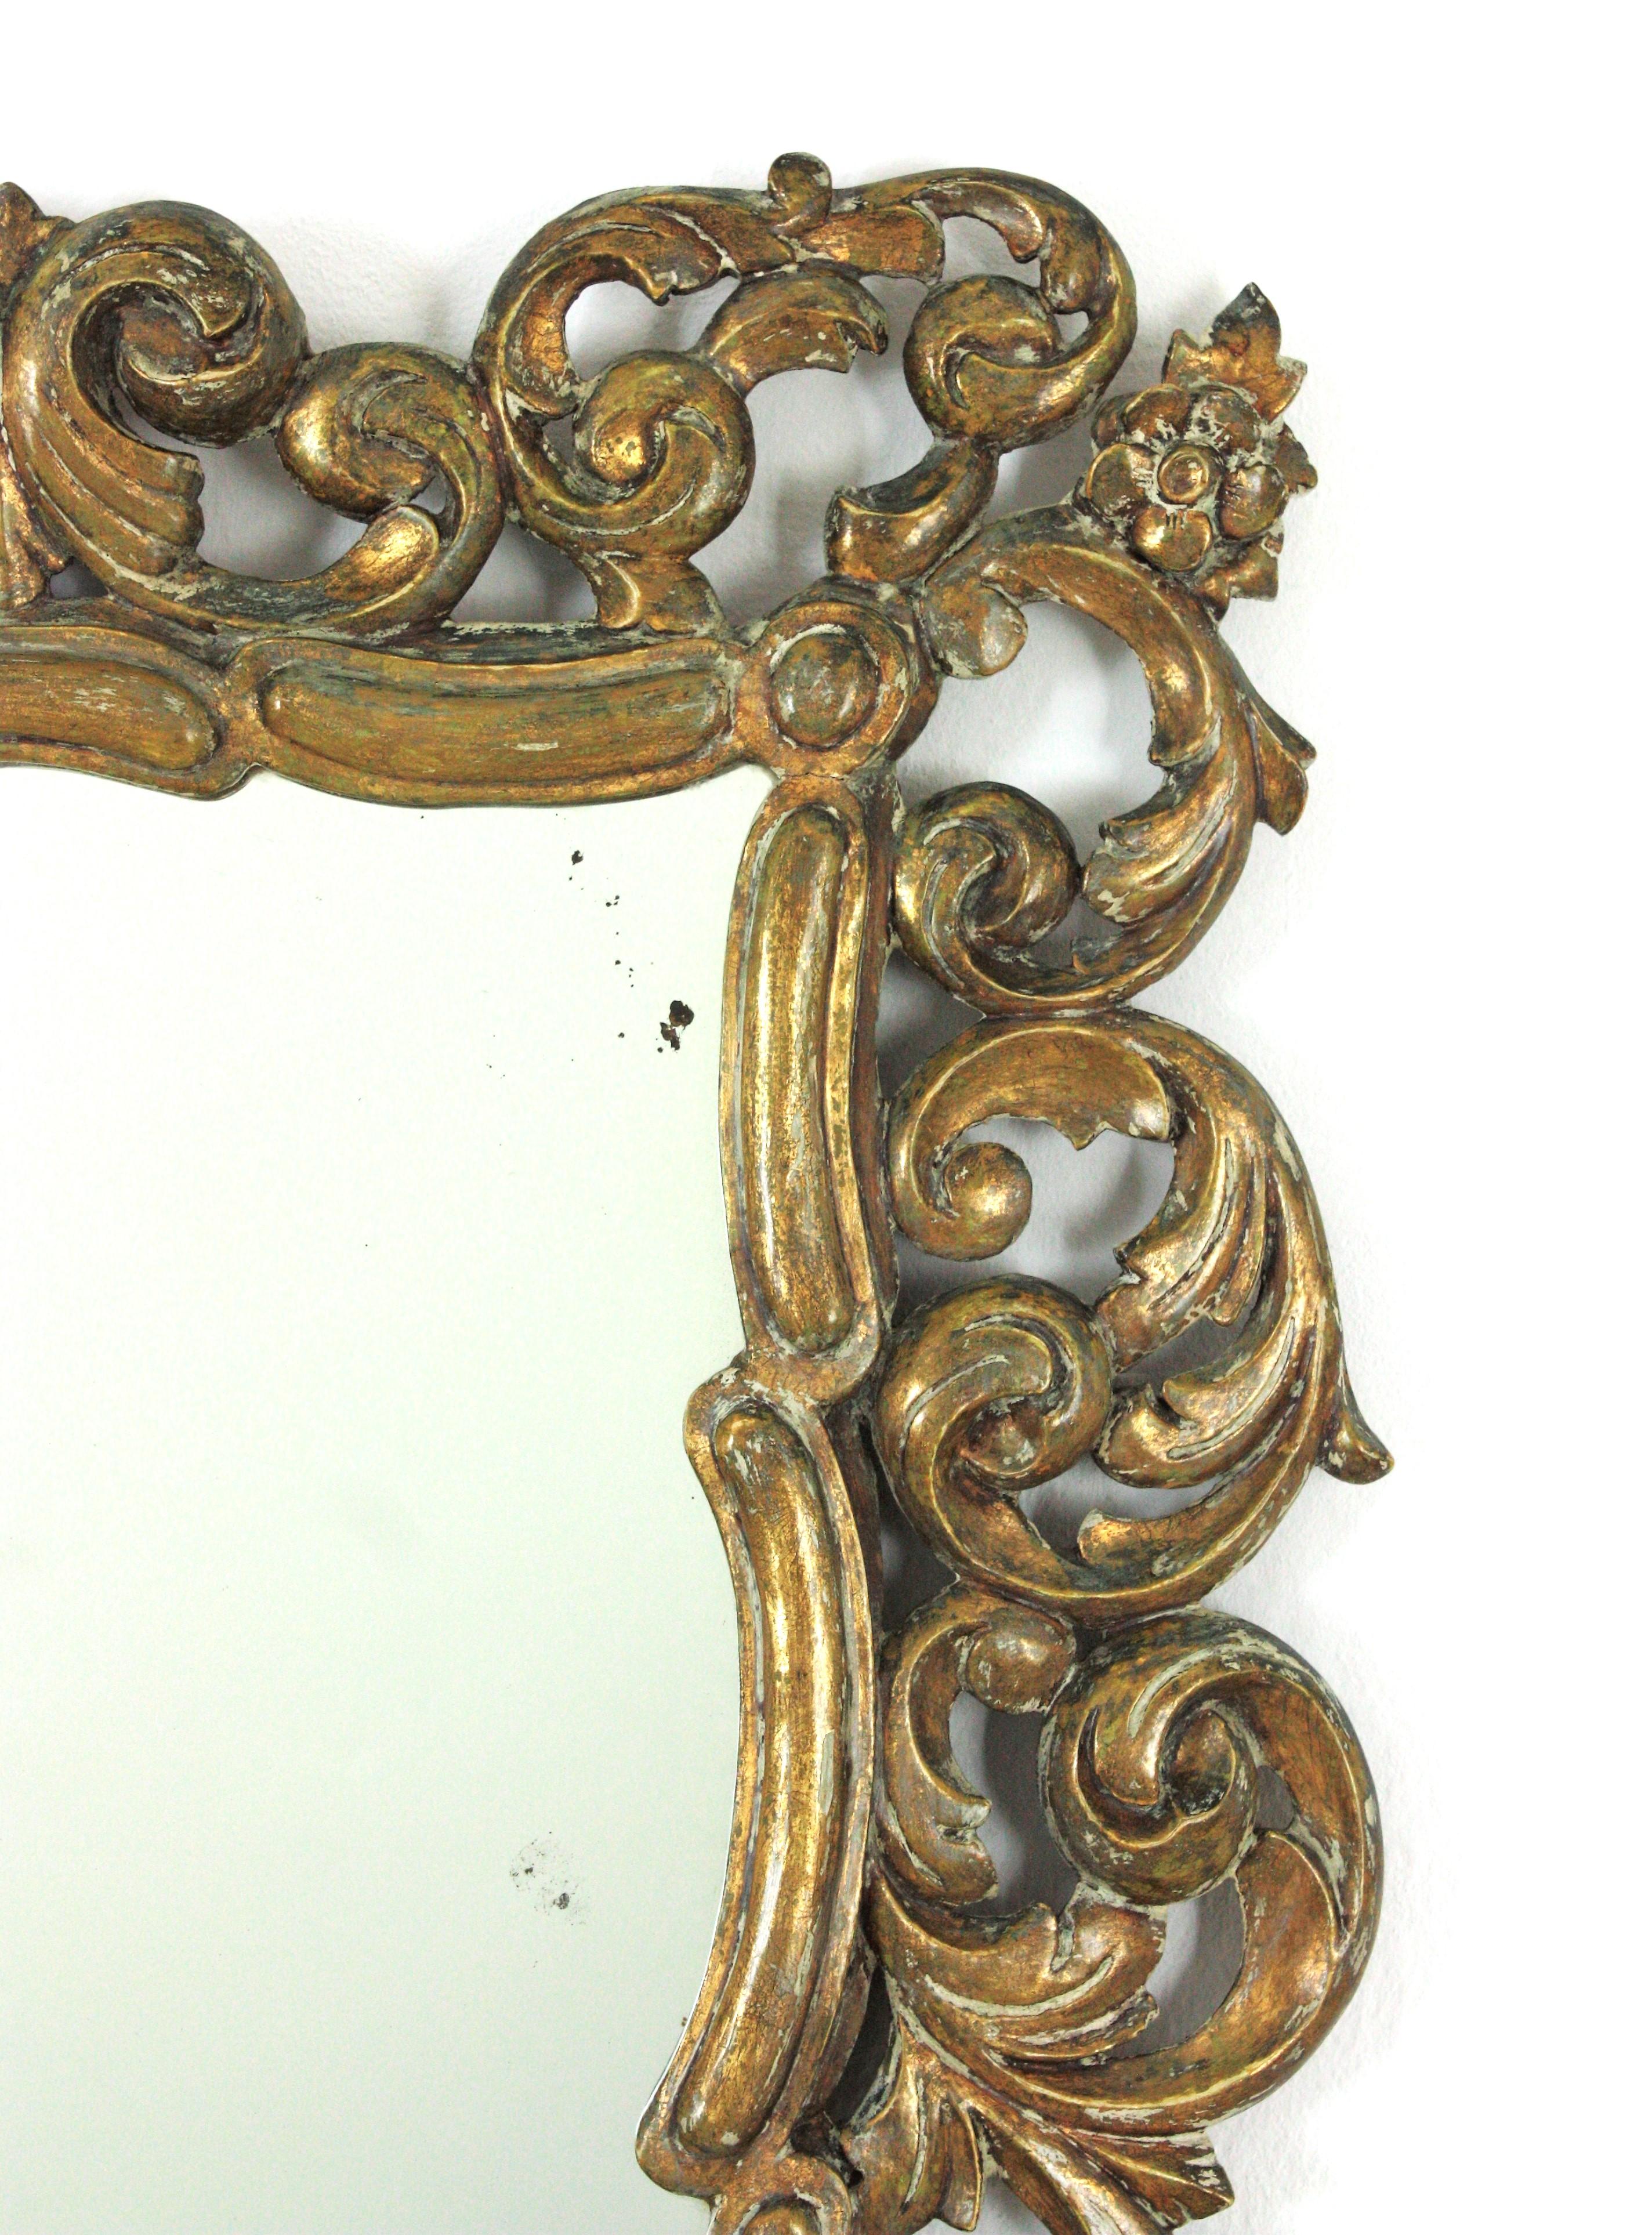 Spanish Foliage Gilt Carved Wood Mirror with Scroll Work Design For Sale 1